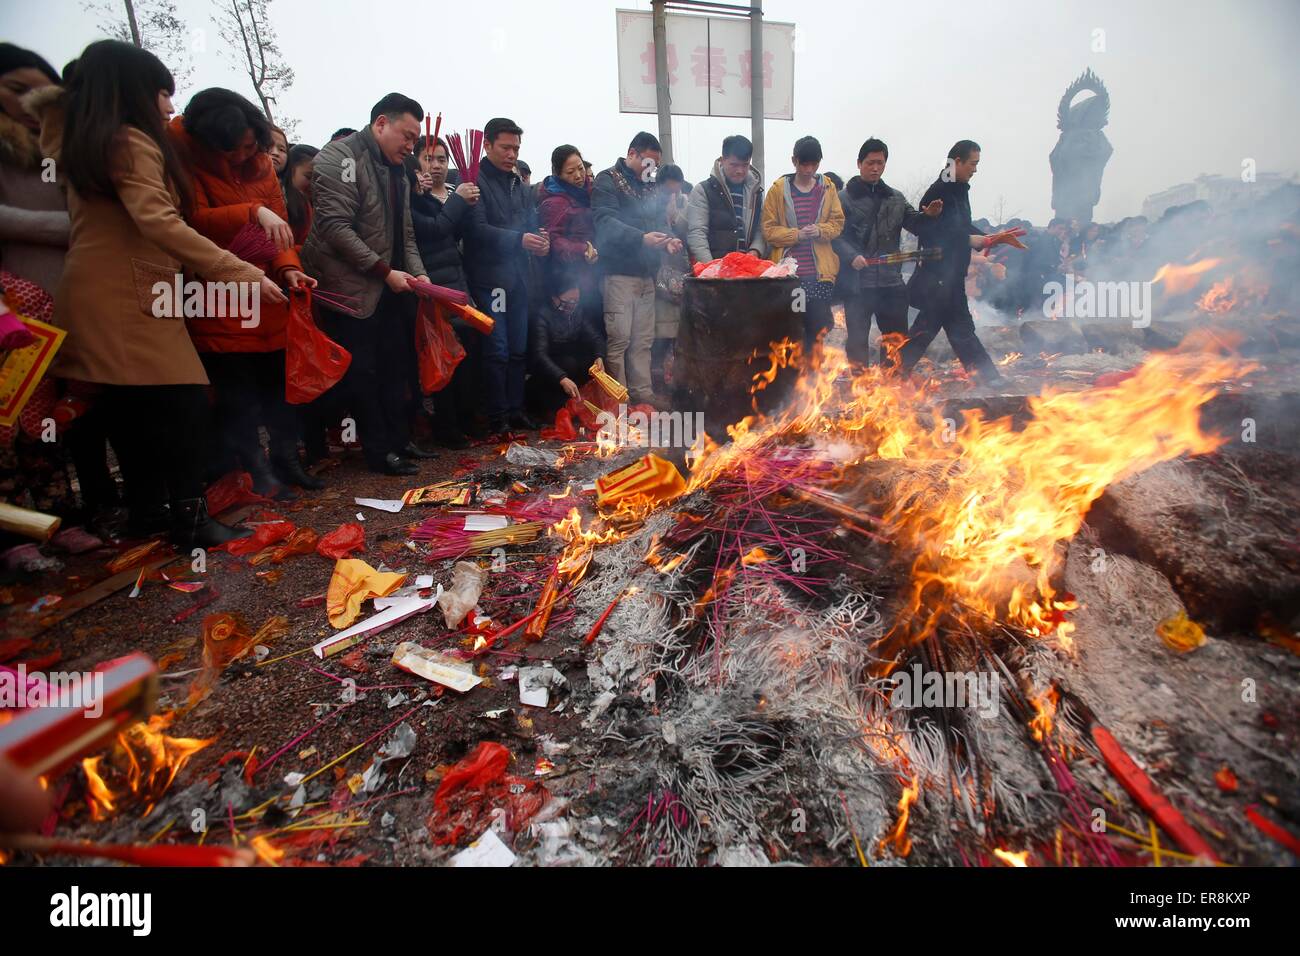 Feb 23, 2015-Wuhan, China- Chinese worshippers burn incenses to pray at the GuiyuanTemple in the hope that it brings them prospe Stock Photo